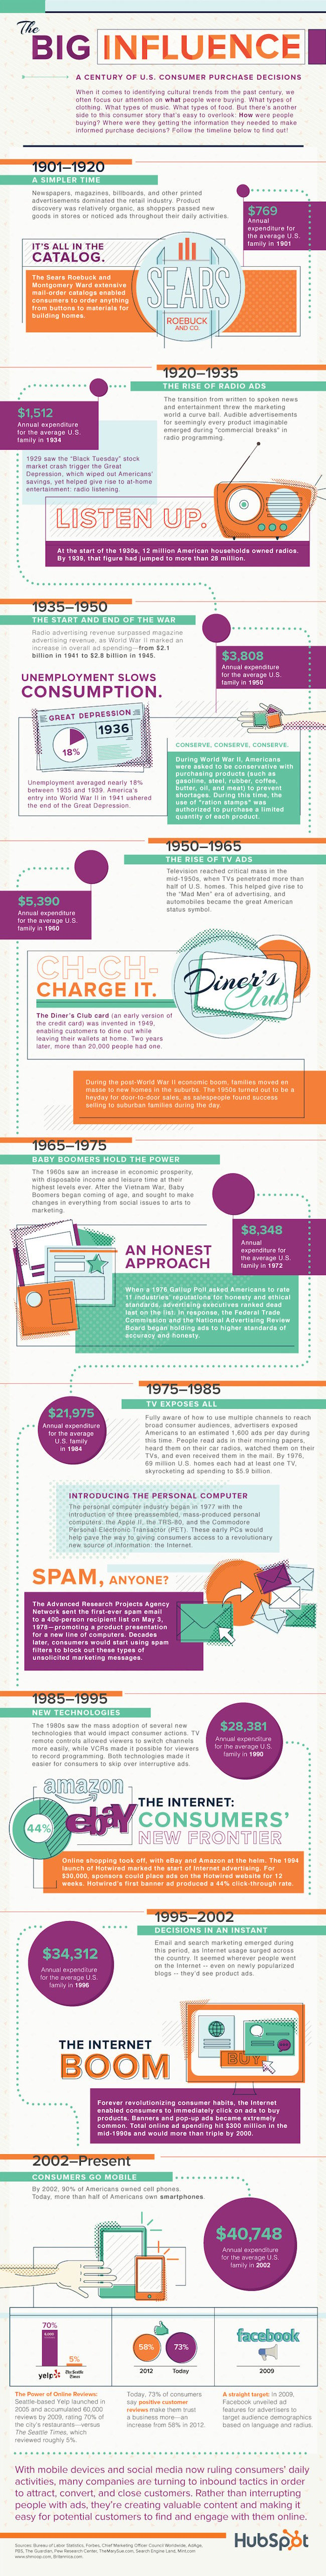 How People Buy: Evolution of Consumer Purchasing